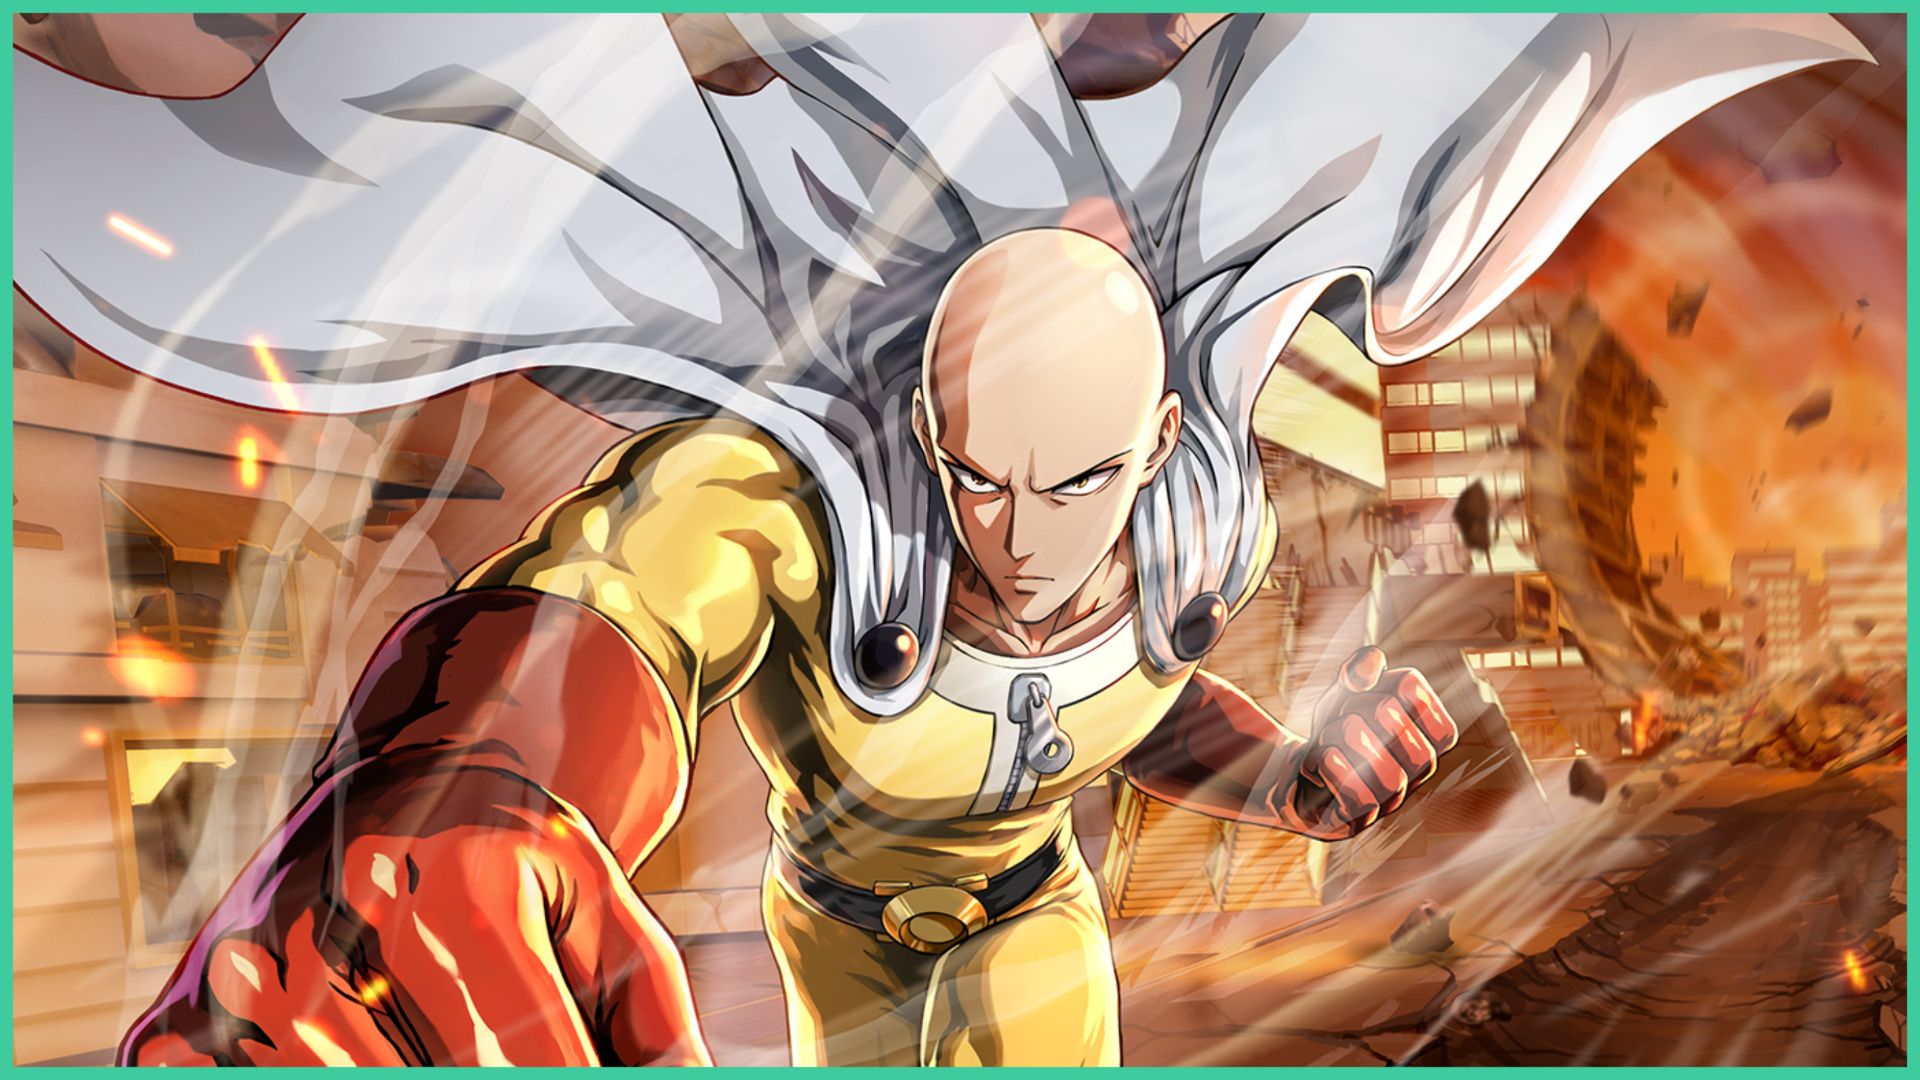 feature image for our one punch man world reroll guide, the image features promo art for the game of saitama from the one punch man franchise as he holds a clenched fist back whilst punching with his other fist, he has a stern expression on his face as his cape flies in the breeze, there are buildings being destroyed in the background as they crumble